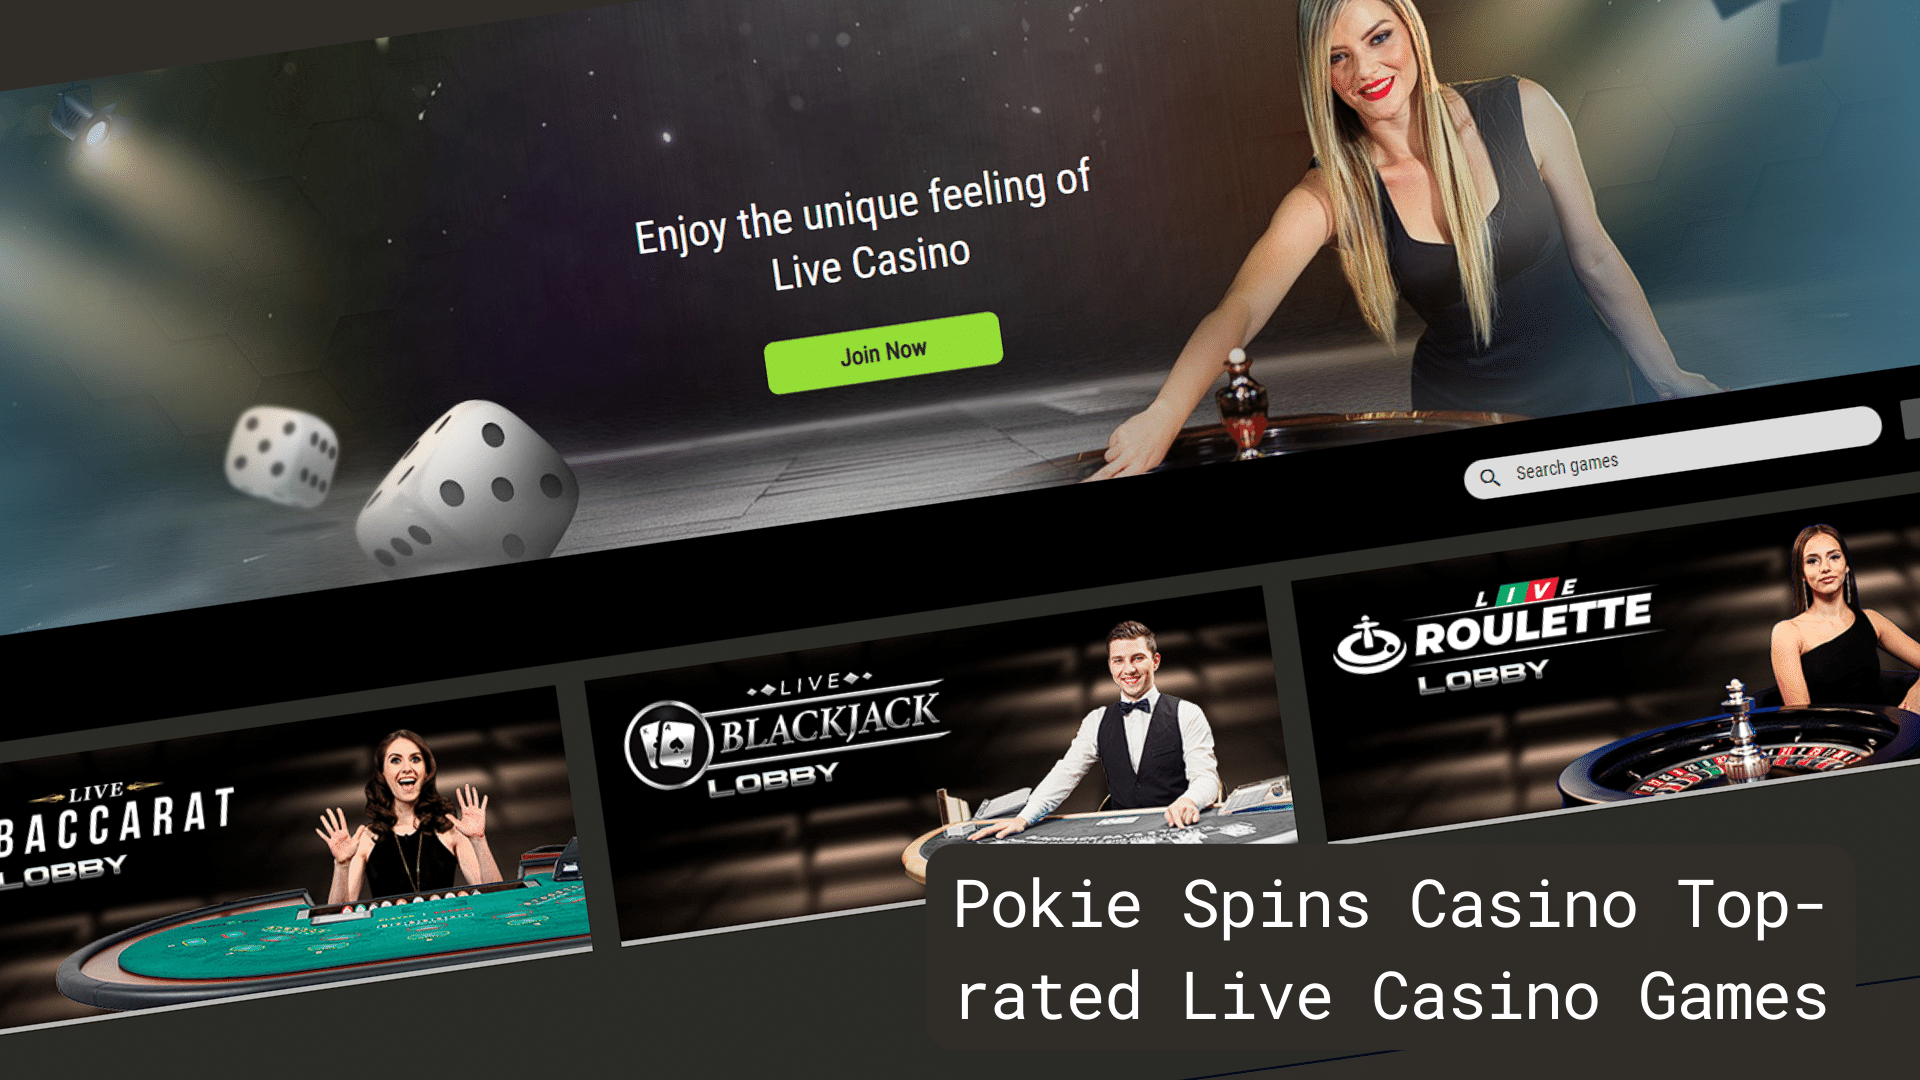 Pokie Spins Casino Top-rated Live Casino Games